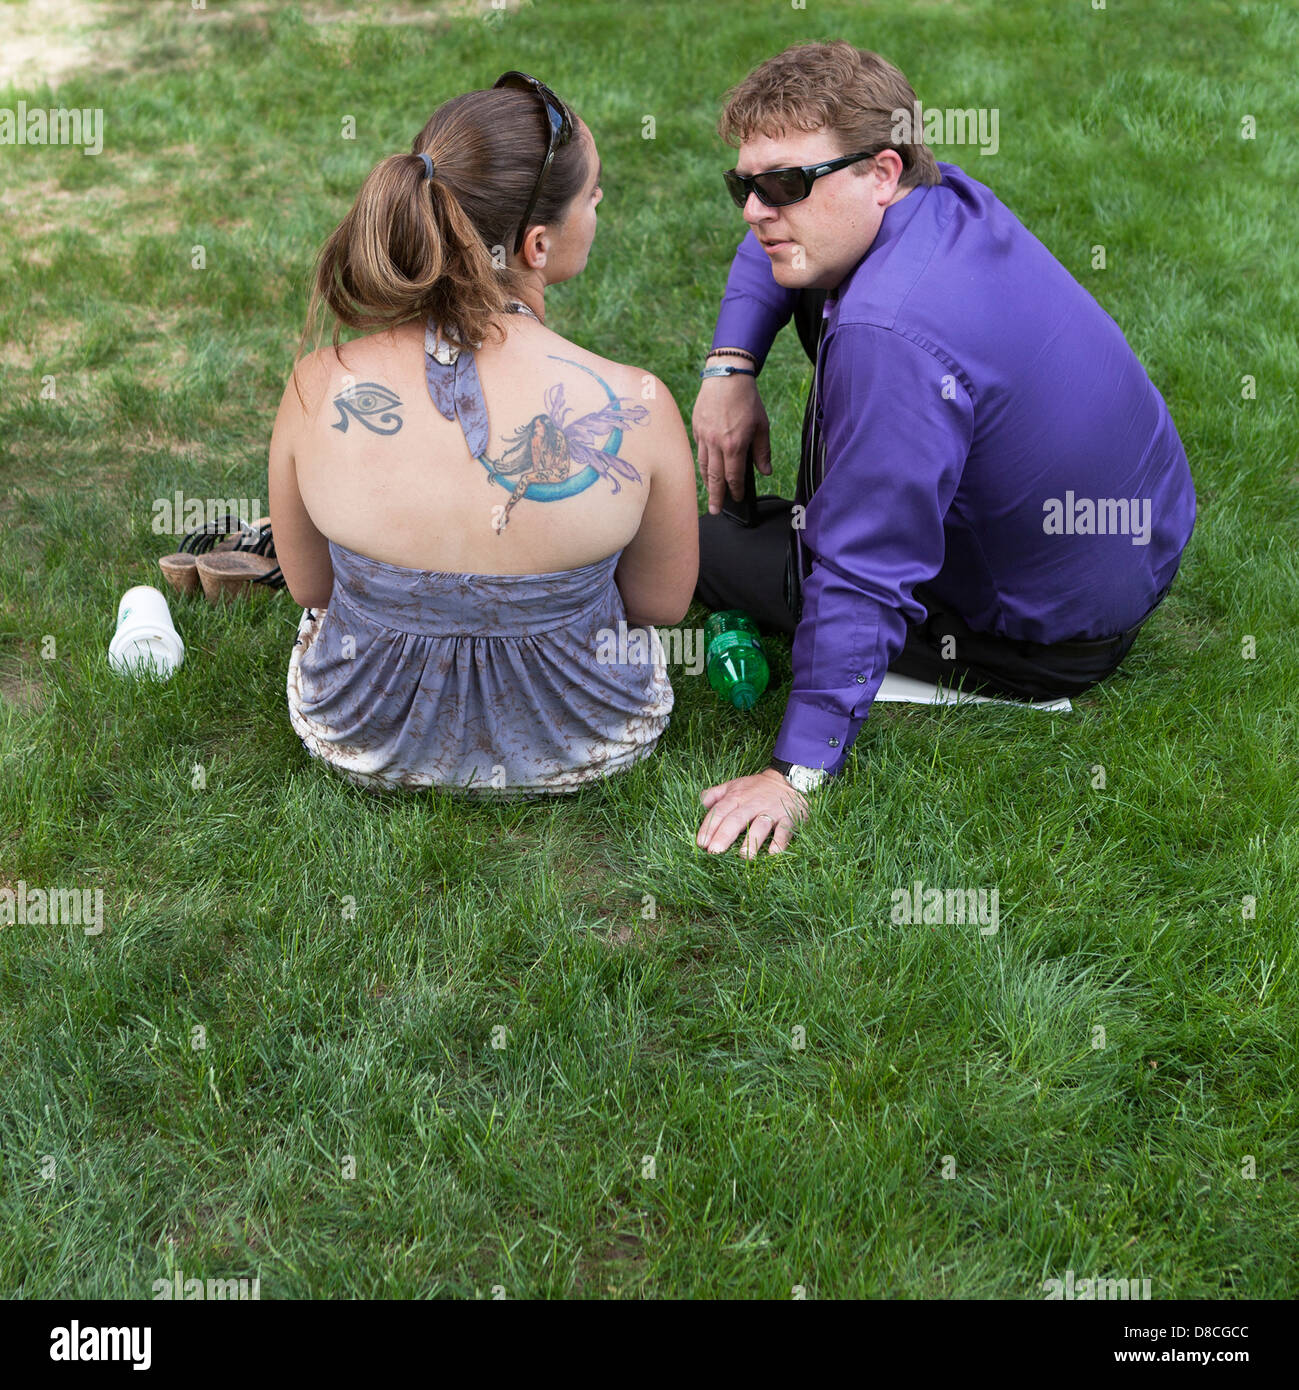 A woman with a large, colorful shoulder tattoo converses with a man on a lawn. Stock Photo